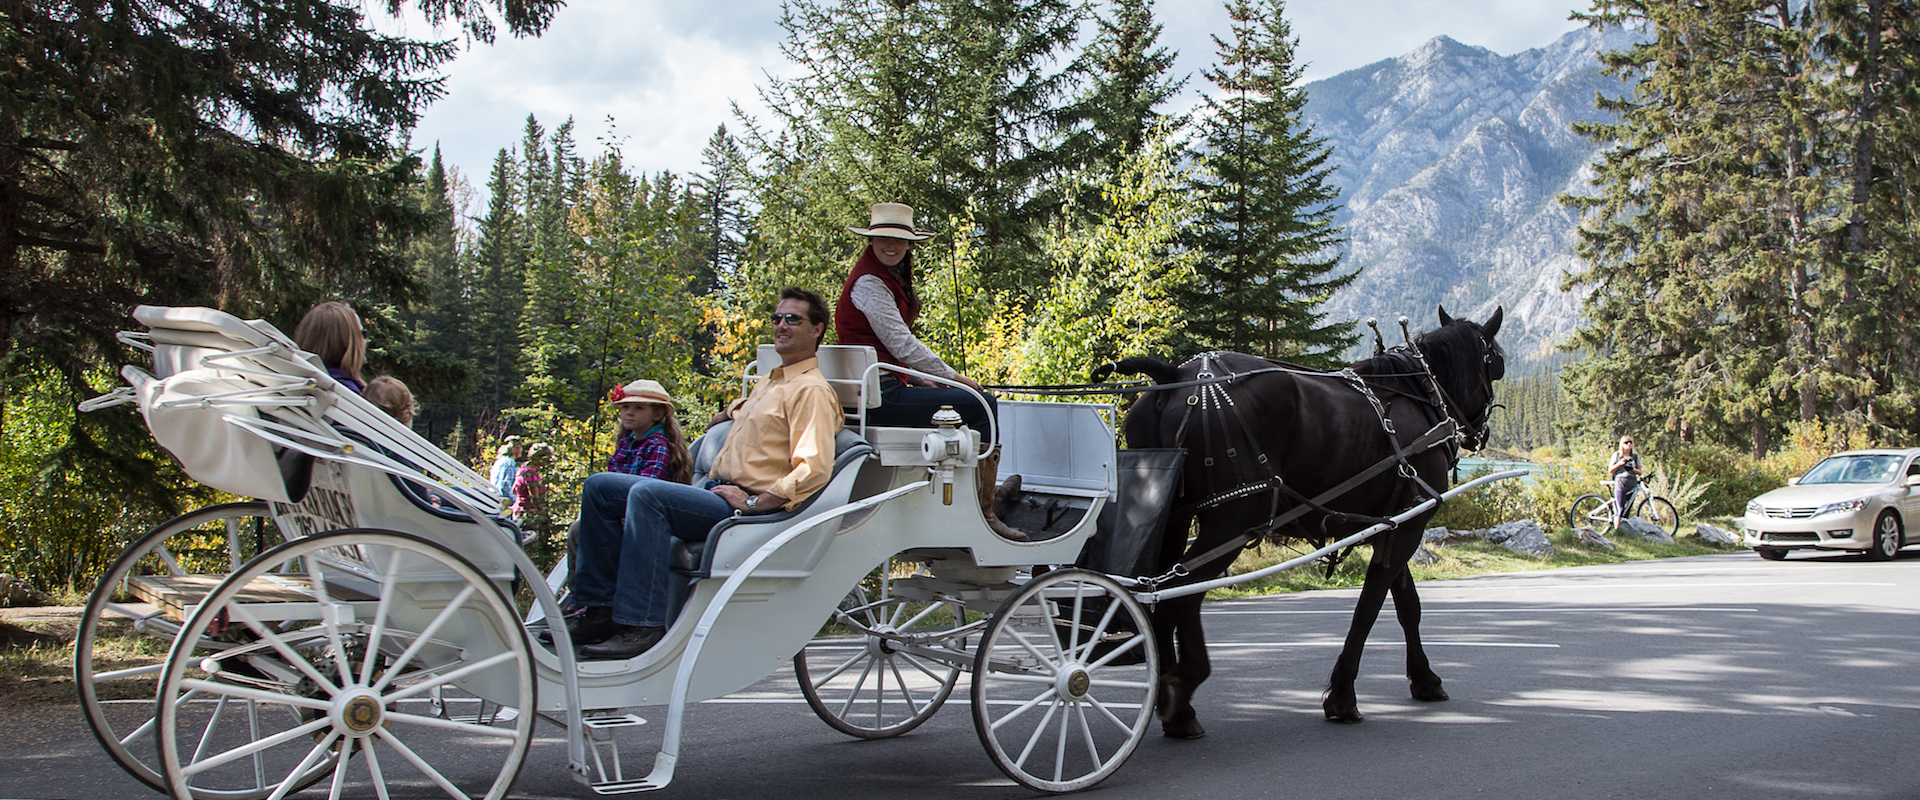 Banff Family Carriage Ride with Banff Trail Riders